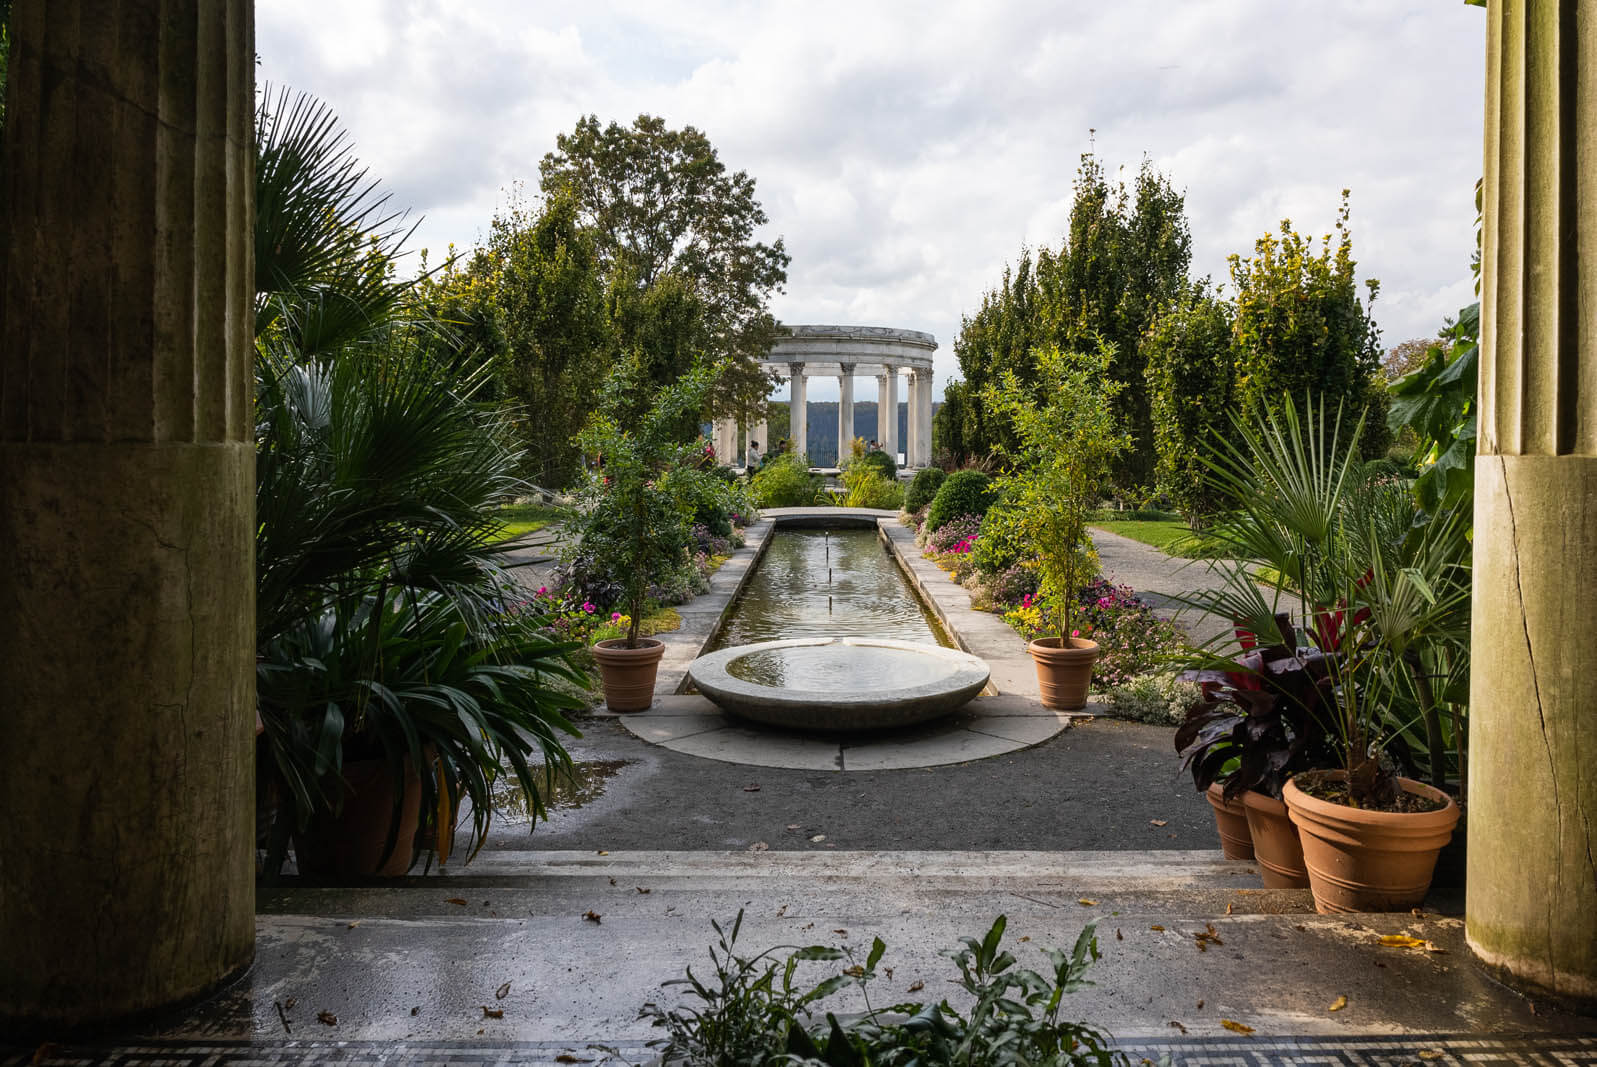 Gorgeous view at Untermyer Gardens Conservancy in Yonkers Westchester County New York